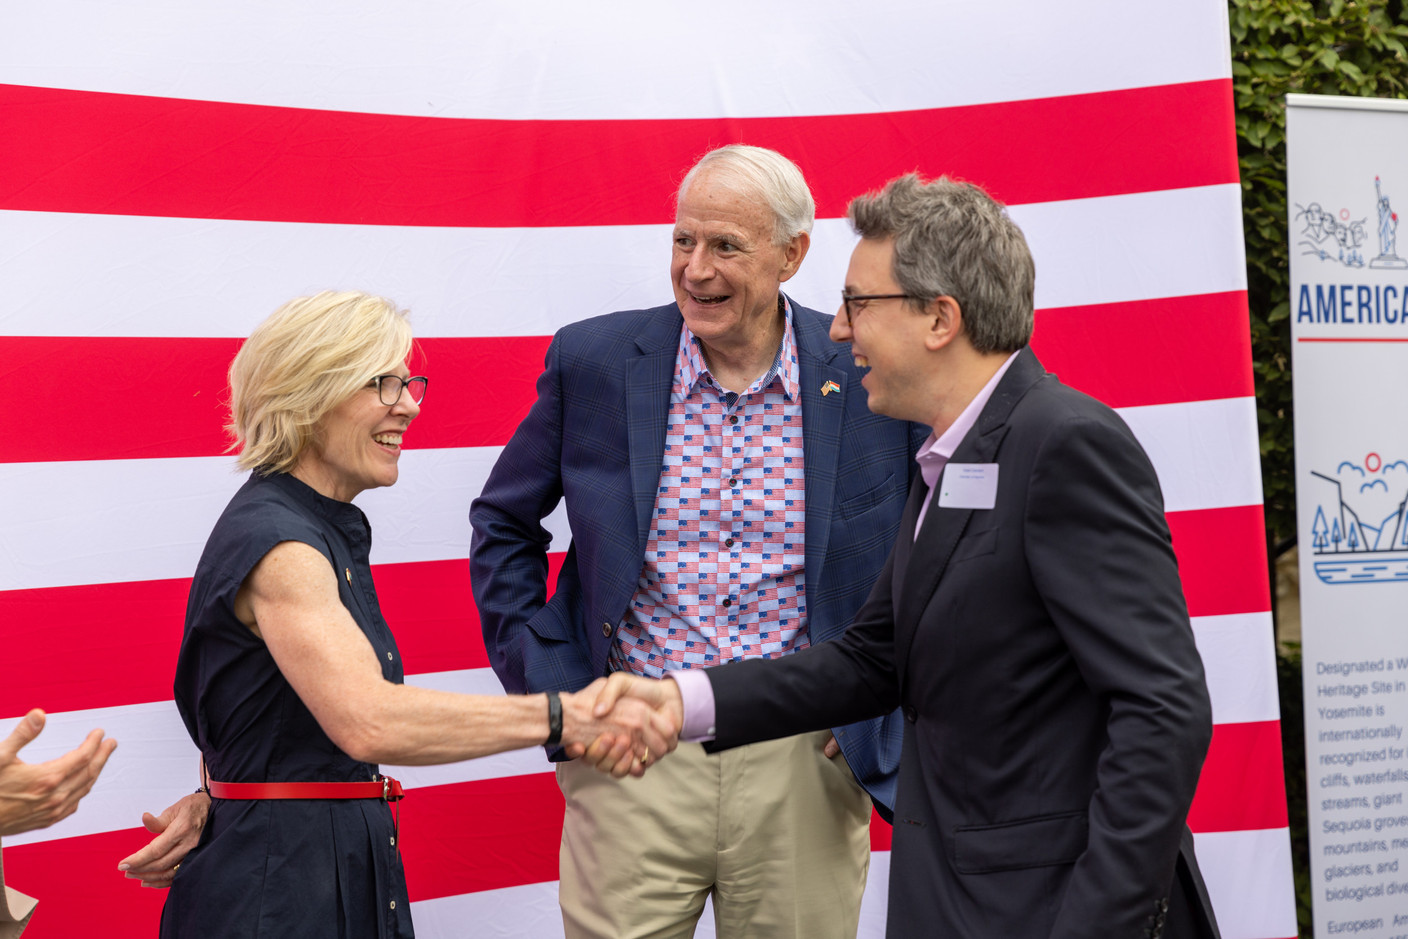 Sven Clement (Pirate Party) greeting the ambassador and his wife. Photo: Romain Gamba/Maison Moderne